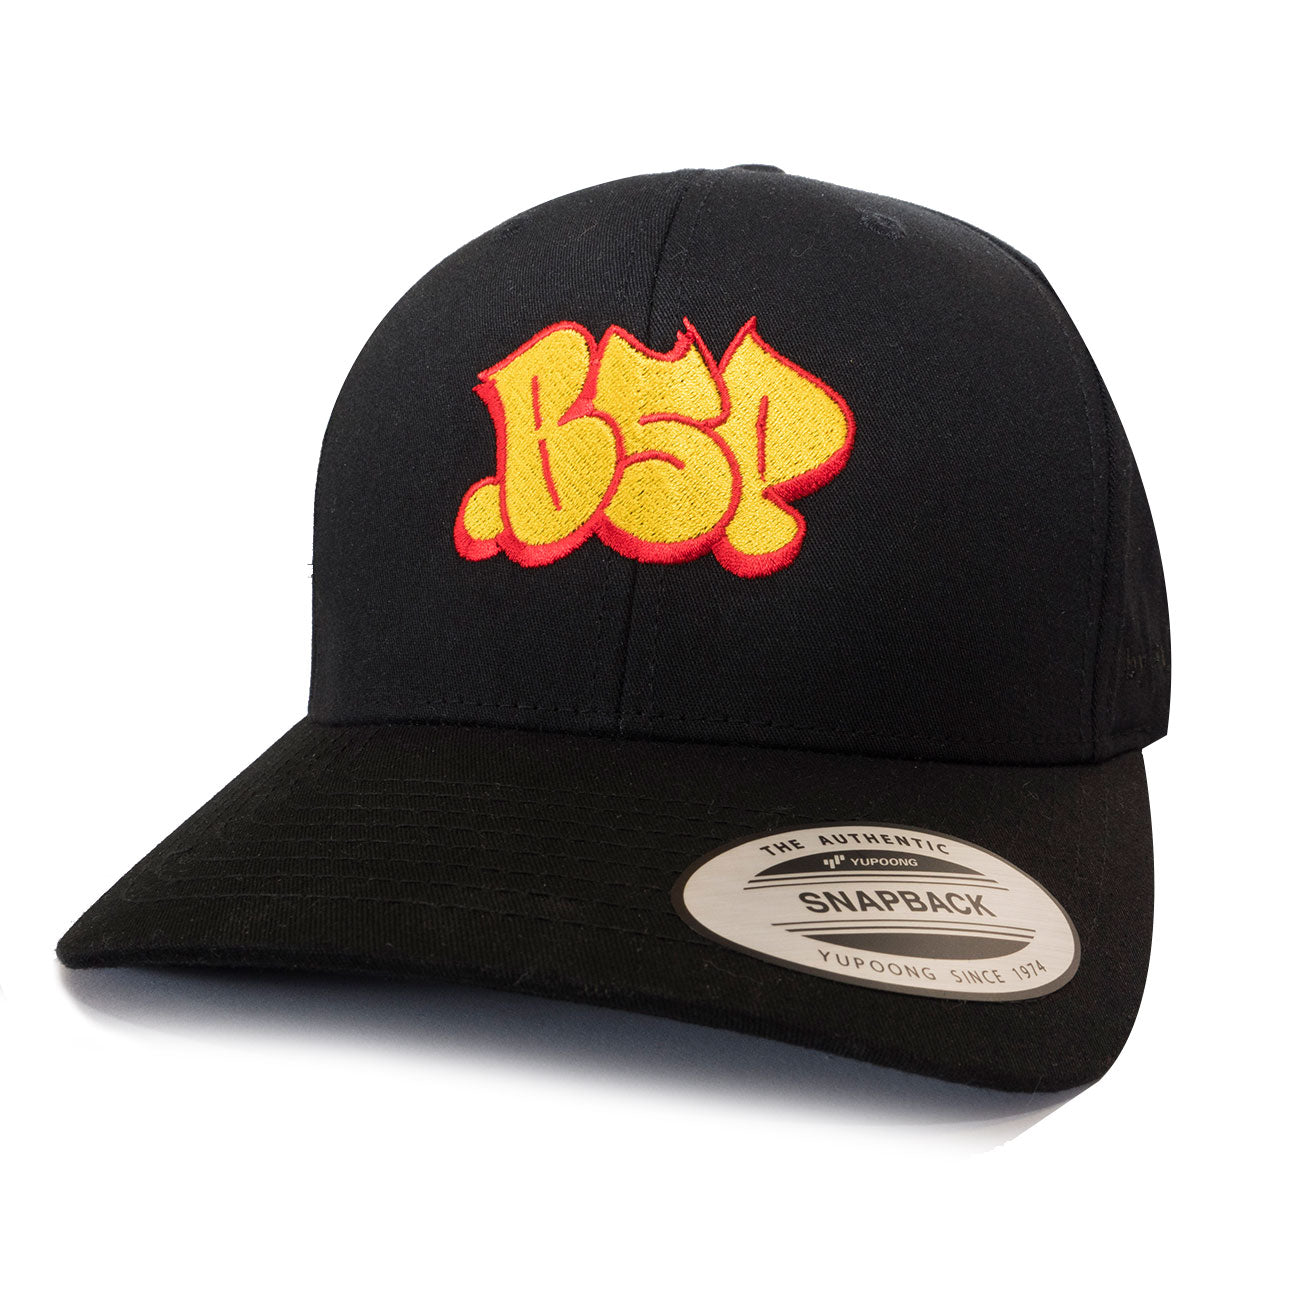 BSP THROWUP SNAPBACK